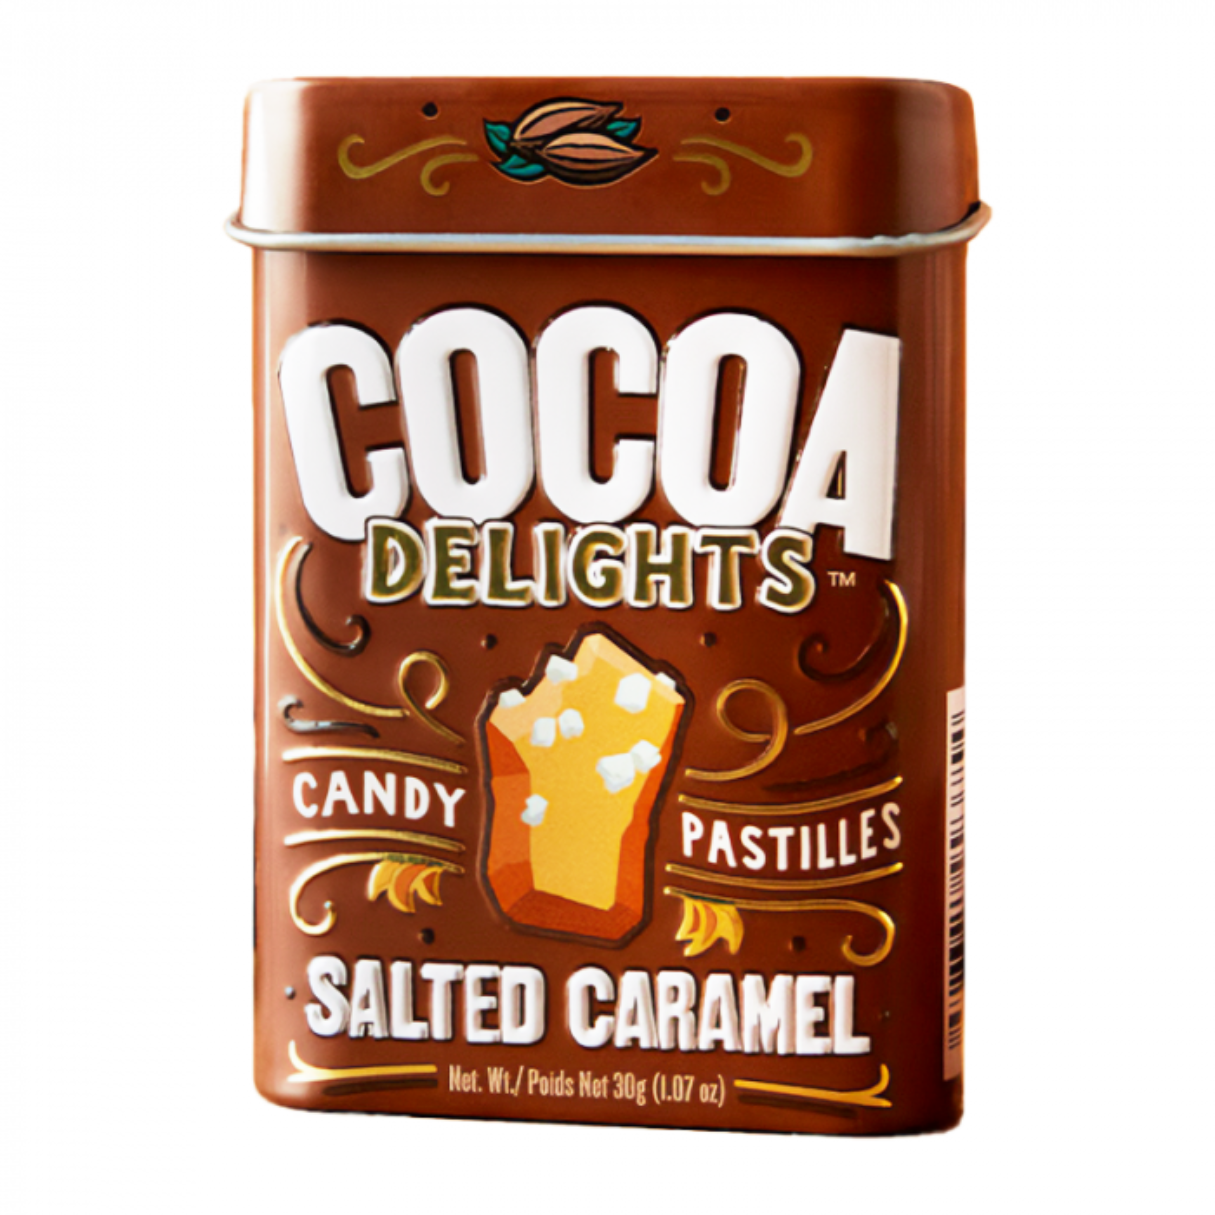 Cocoa Delights Salted Caramel 1.07oz - 144ct